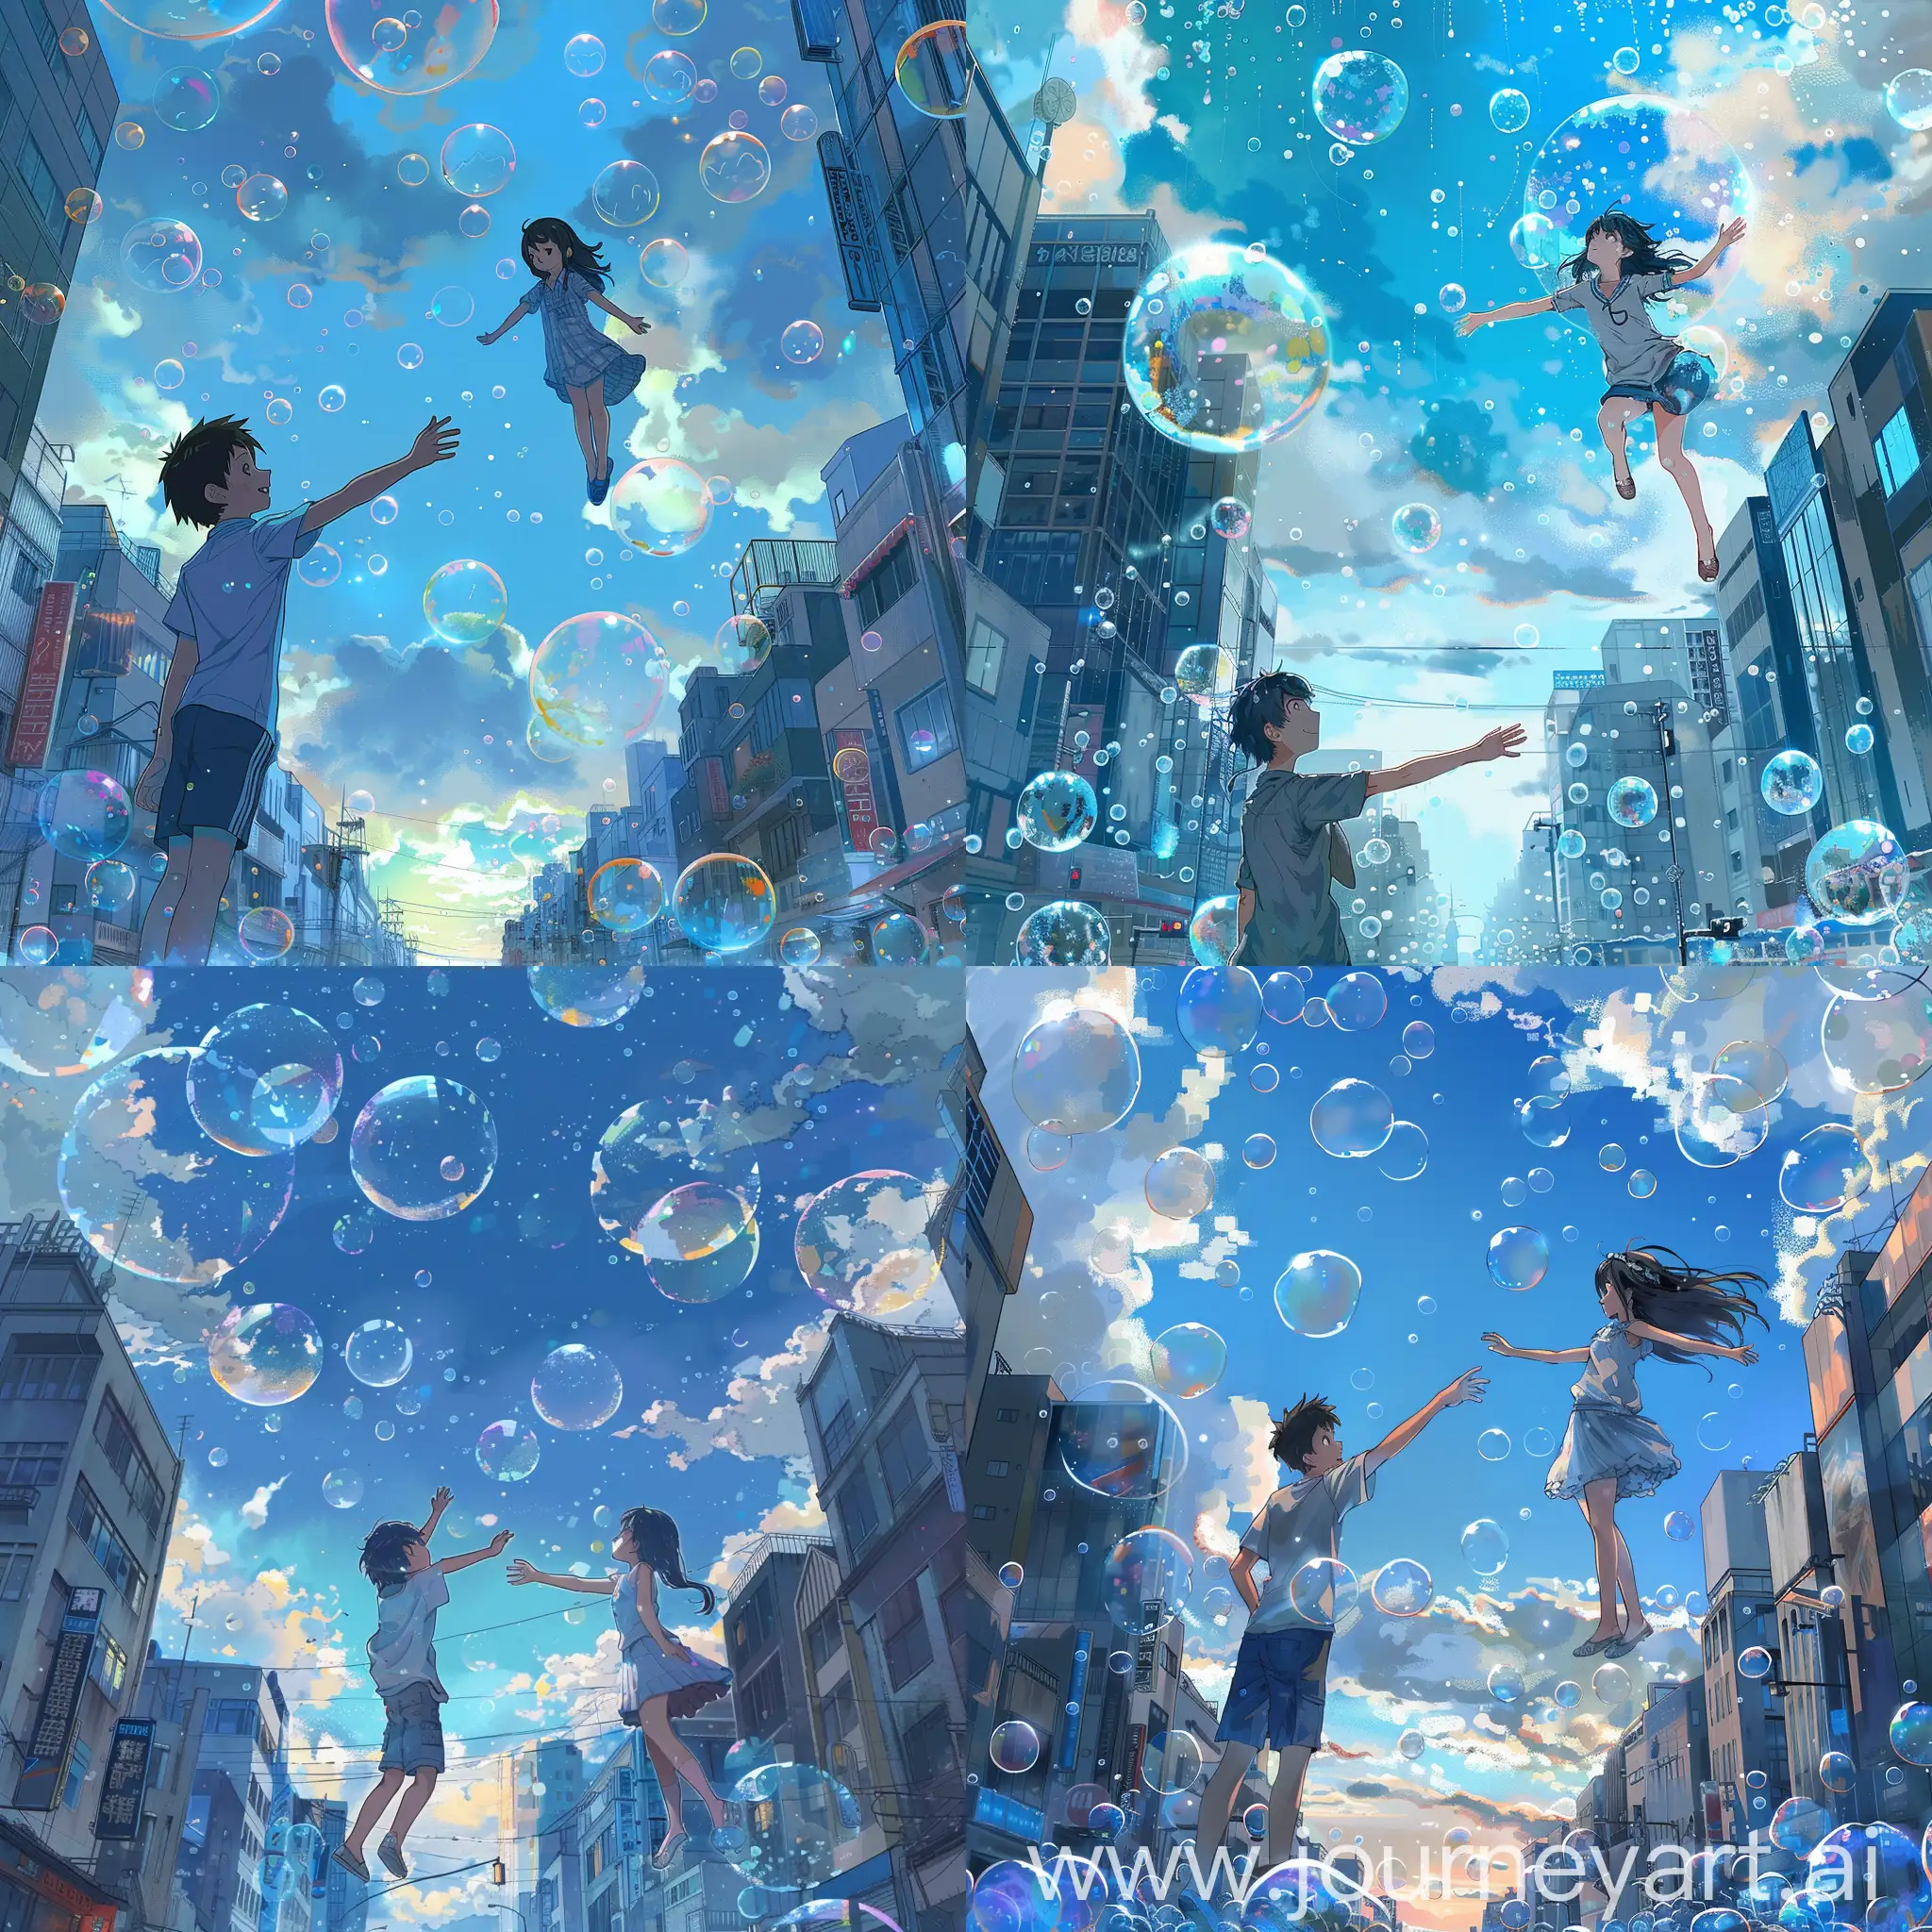  Hina and hodaka from weathering with you anime are floating in the sky among the bubbles in the city. ((Weathering with you)),Hina,hodaka, from teni ko anime,The boy is reaching out to the girl. The girl is infront of him. The sky is blue and cloudy. The buildings are tall and the streets are crowded. The art style is anime. The artist is unknown. The image is in the style of Makoto Shinkai. The colors are vibrant and the lighting is bright. The bubbles are transparent and the reflections are anime style,art of makoto Shinkai,